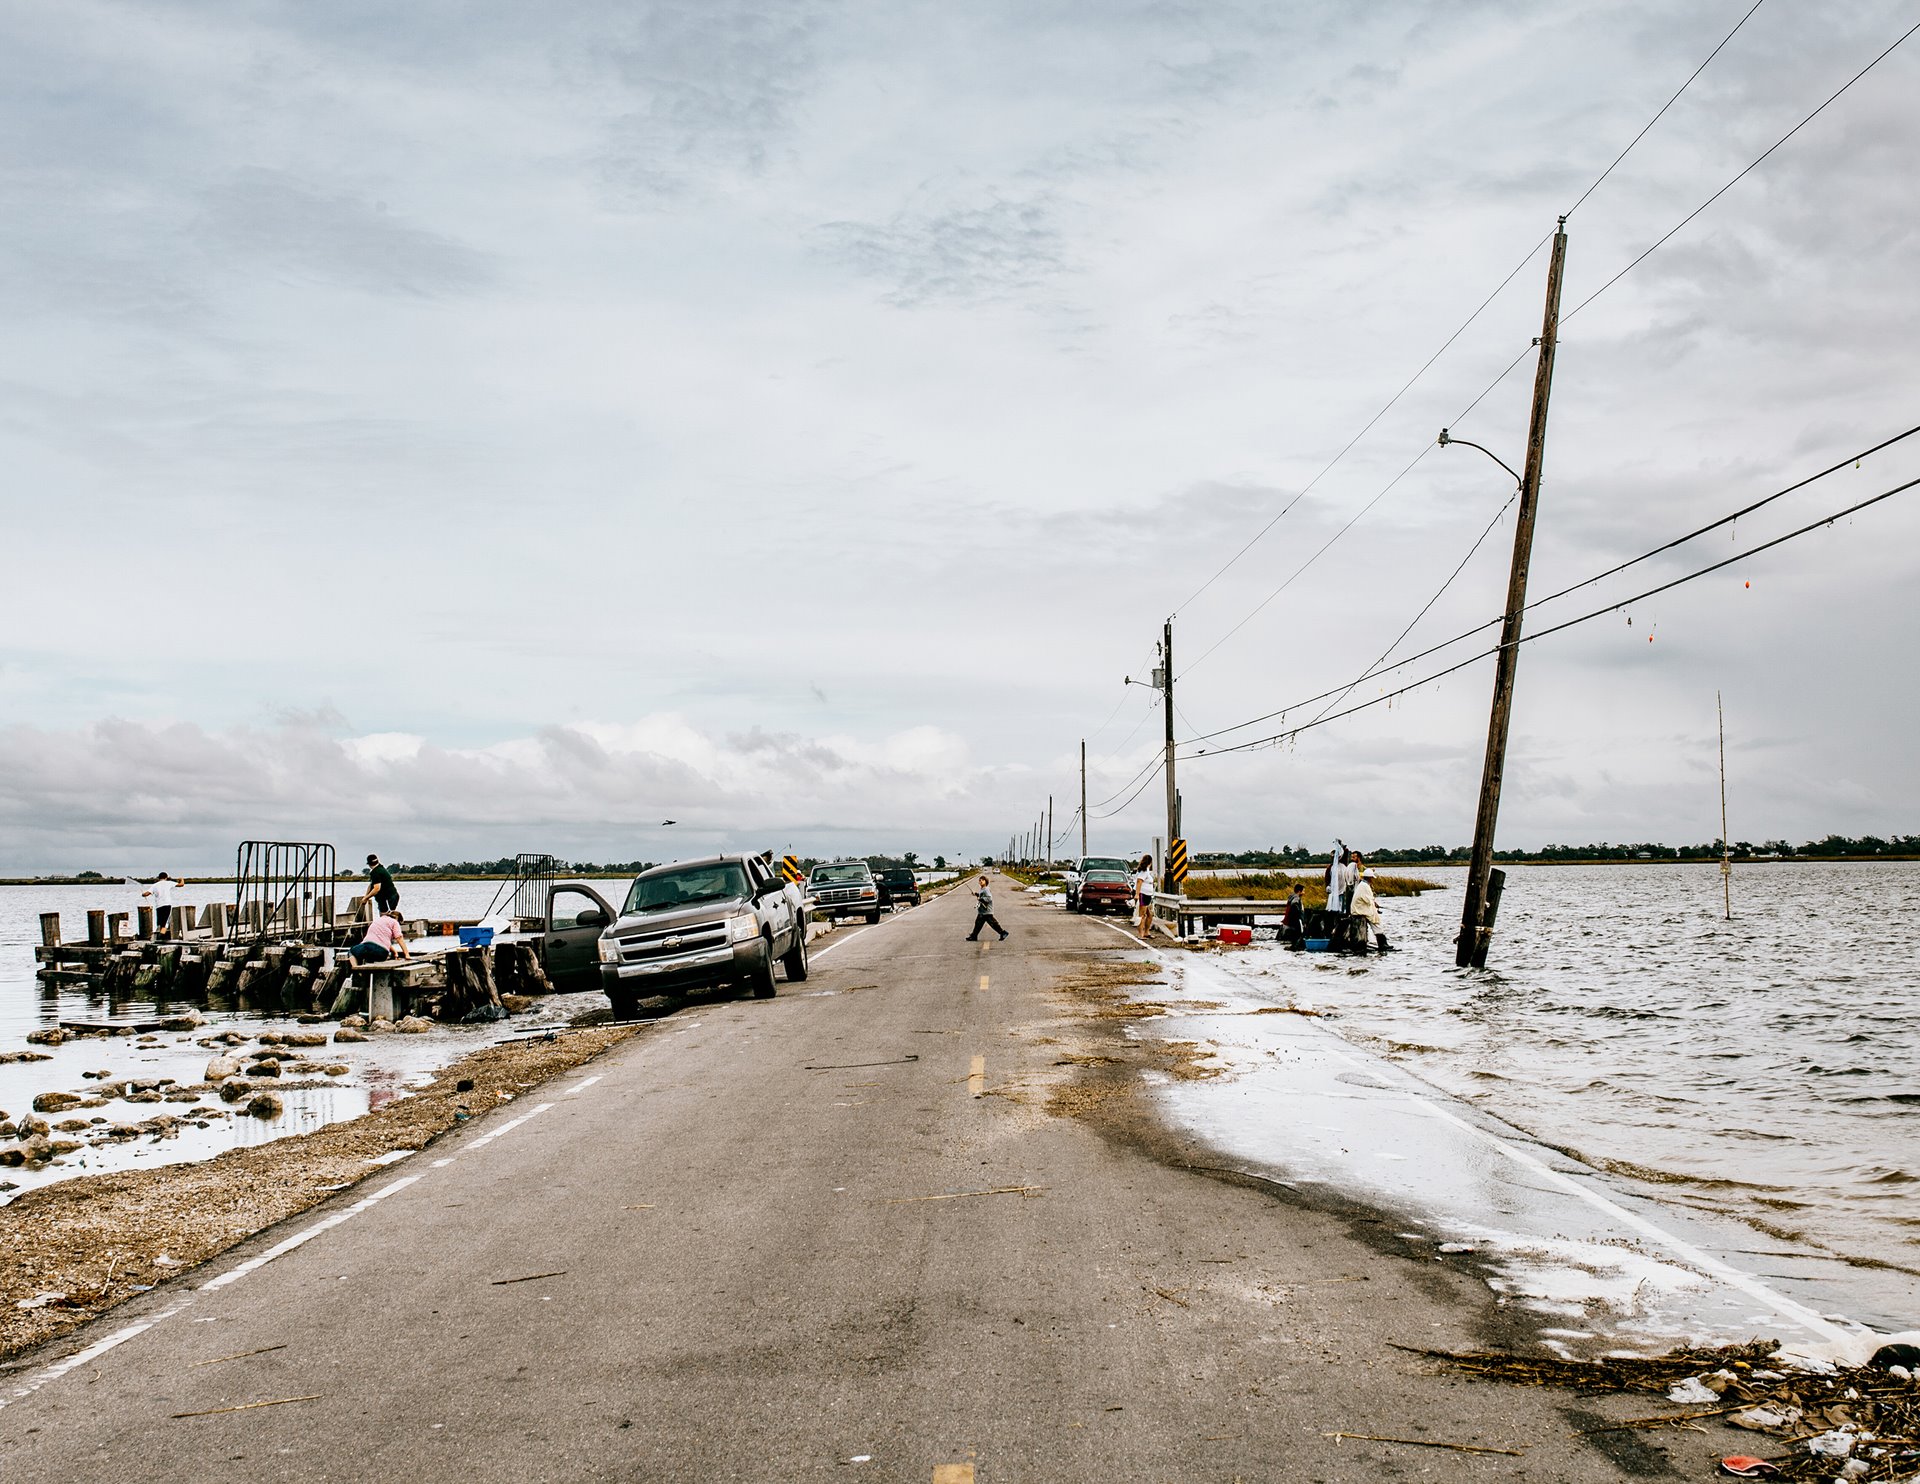 Island Road is the only thoroughfare connecting Isle de Jean-Charles to the mainland. It becomes inundated by water during high tides. During hurricanes, it may be entirely submerged. Federal funds are no longer available for road repairs because of the small number of residents on the island. Isle de Jean-Charles, Louisiana, United States.